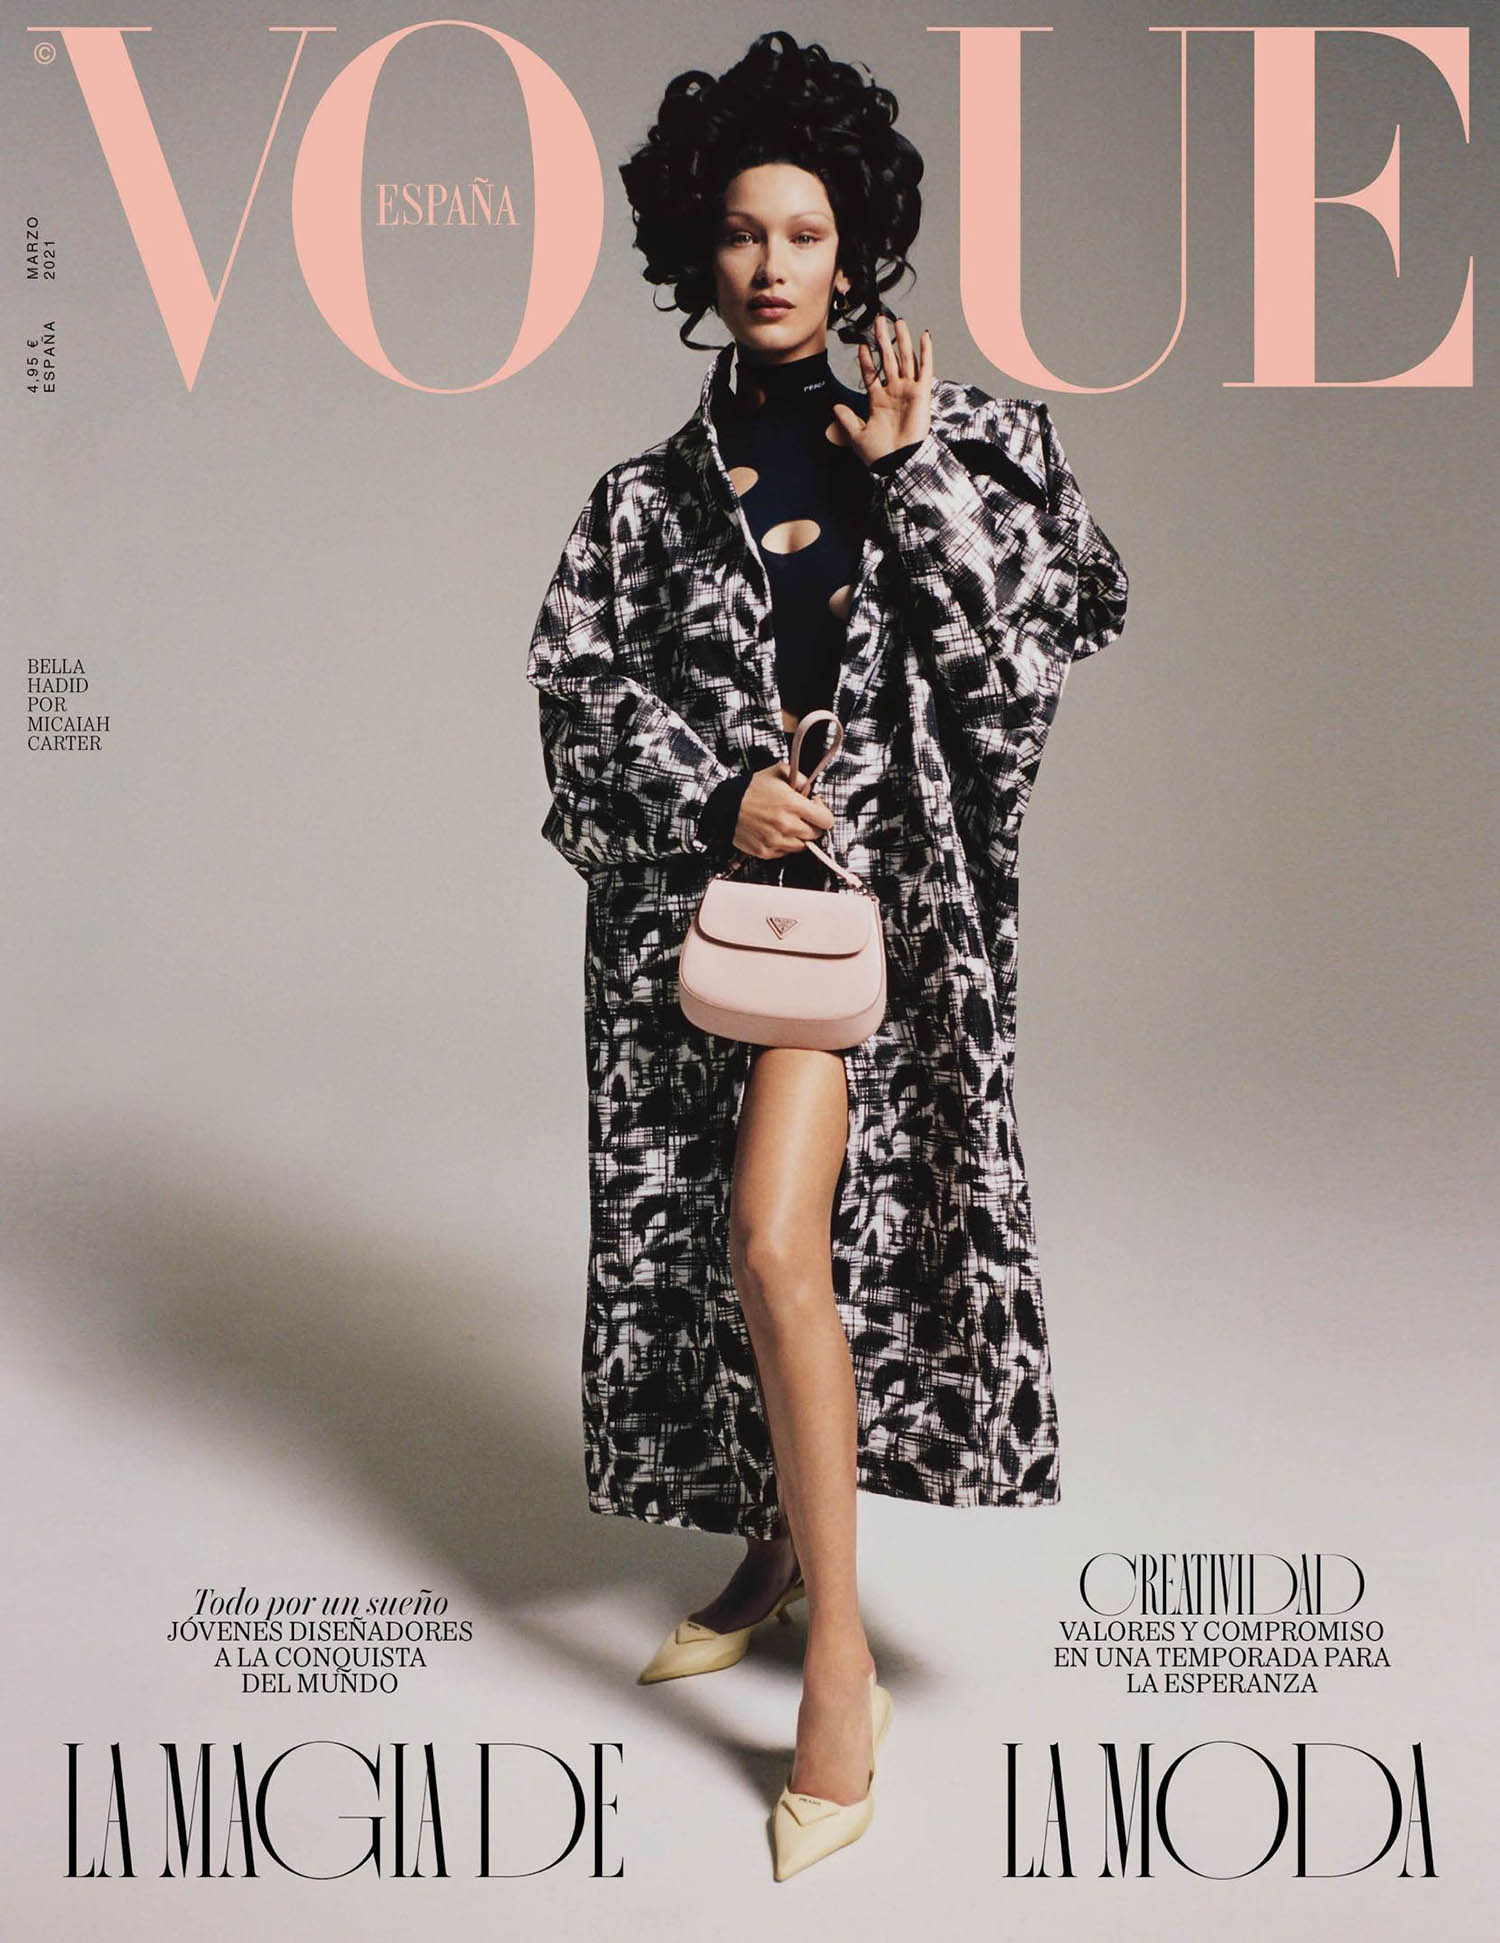 Bella Hadid covers Vogue Spain March 2021 by Micaiah Carter